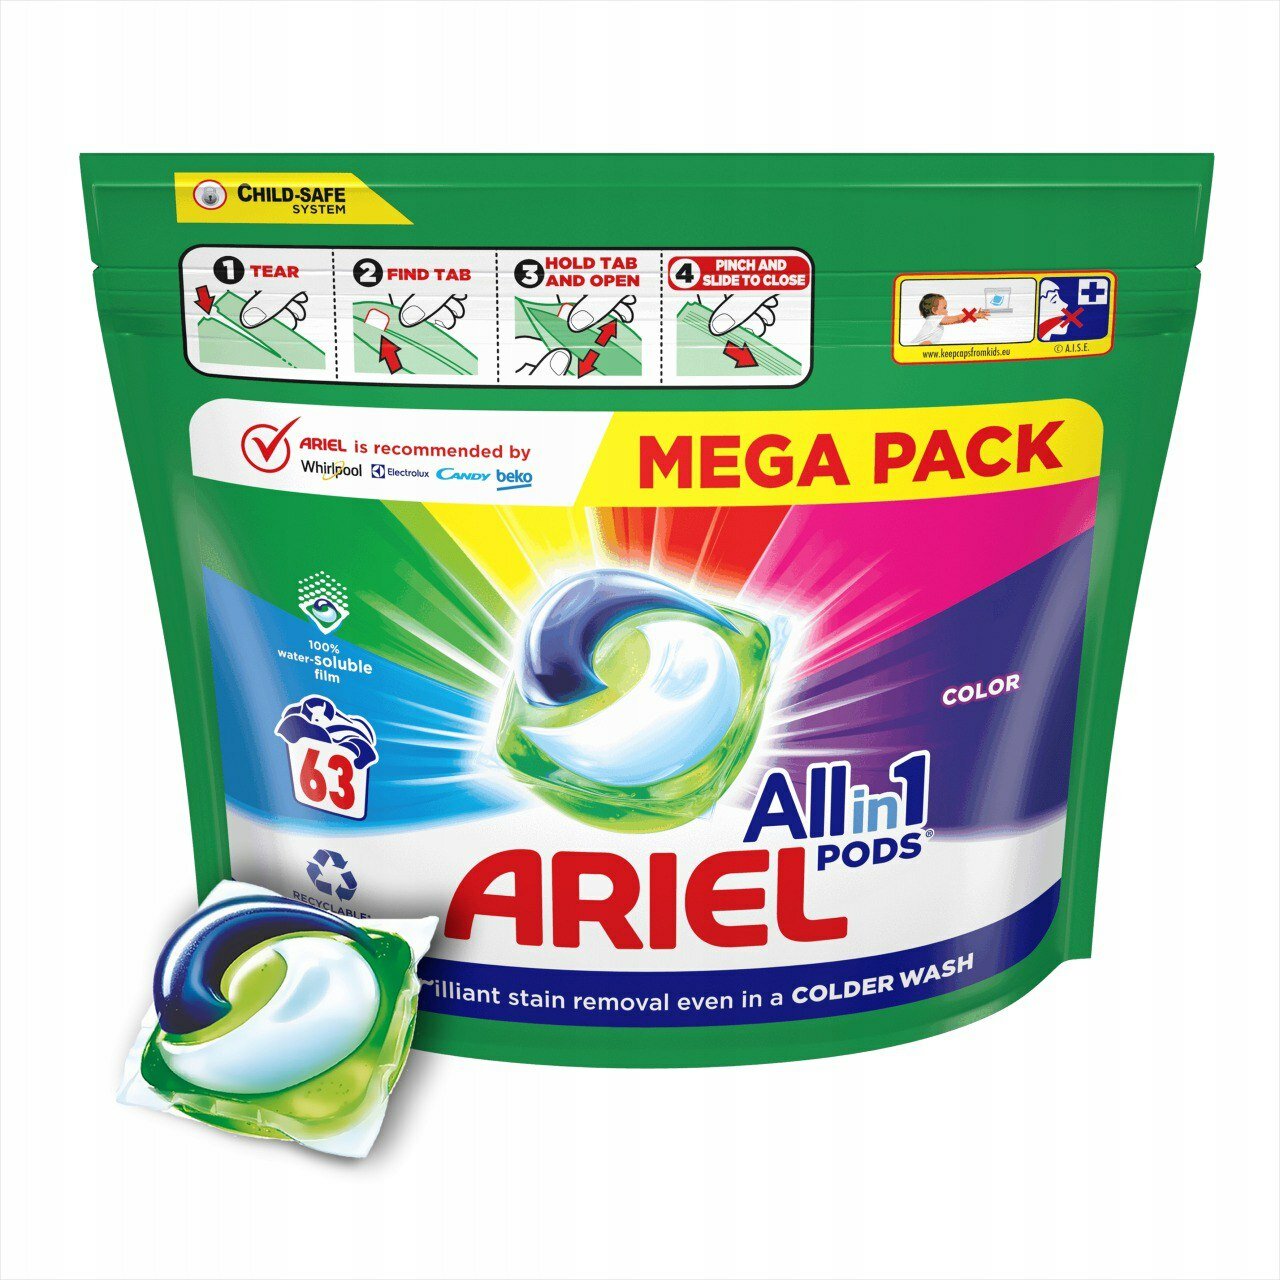 ARIEL All in 1 Pods COLOR Капсулы для стирки 63 шт